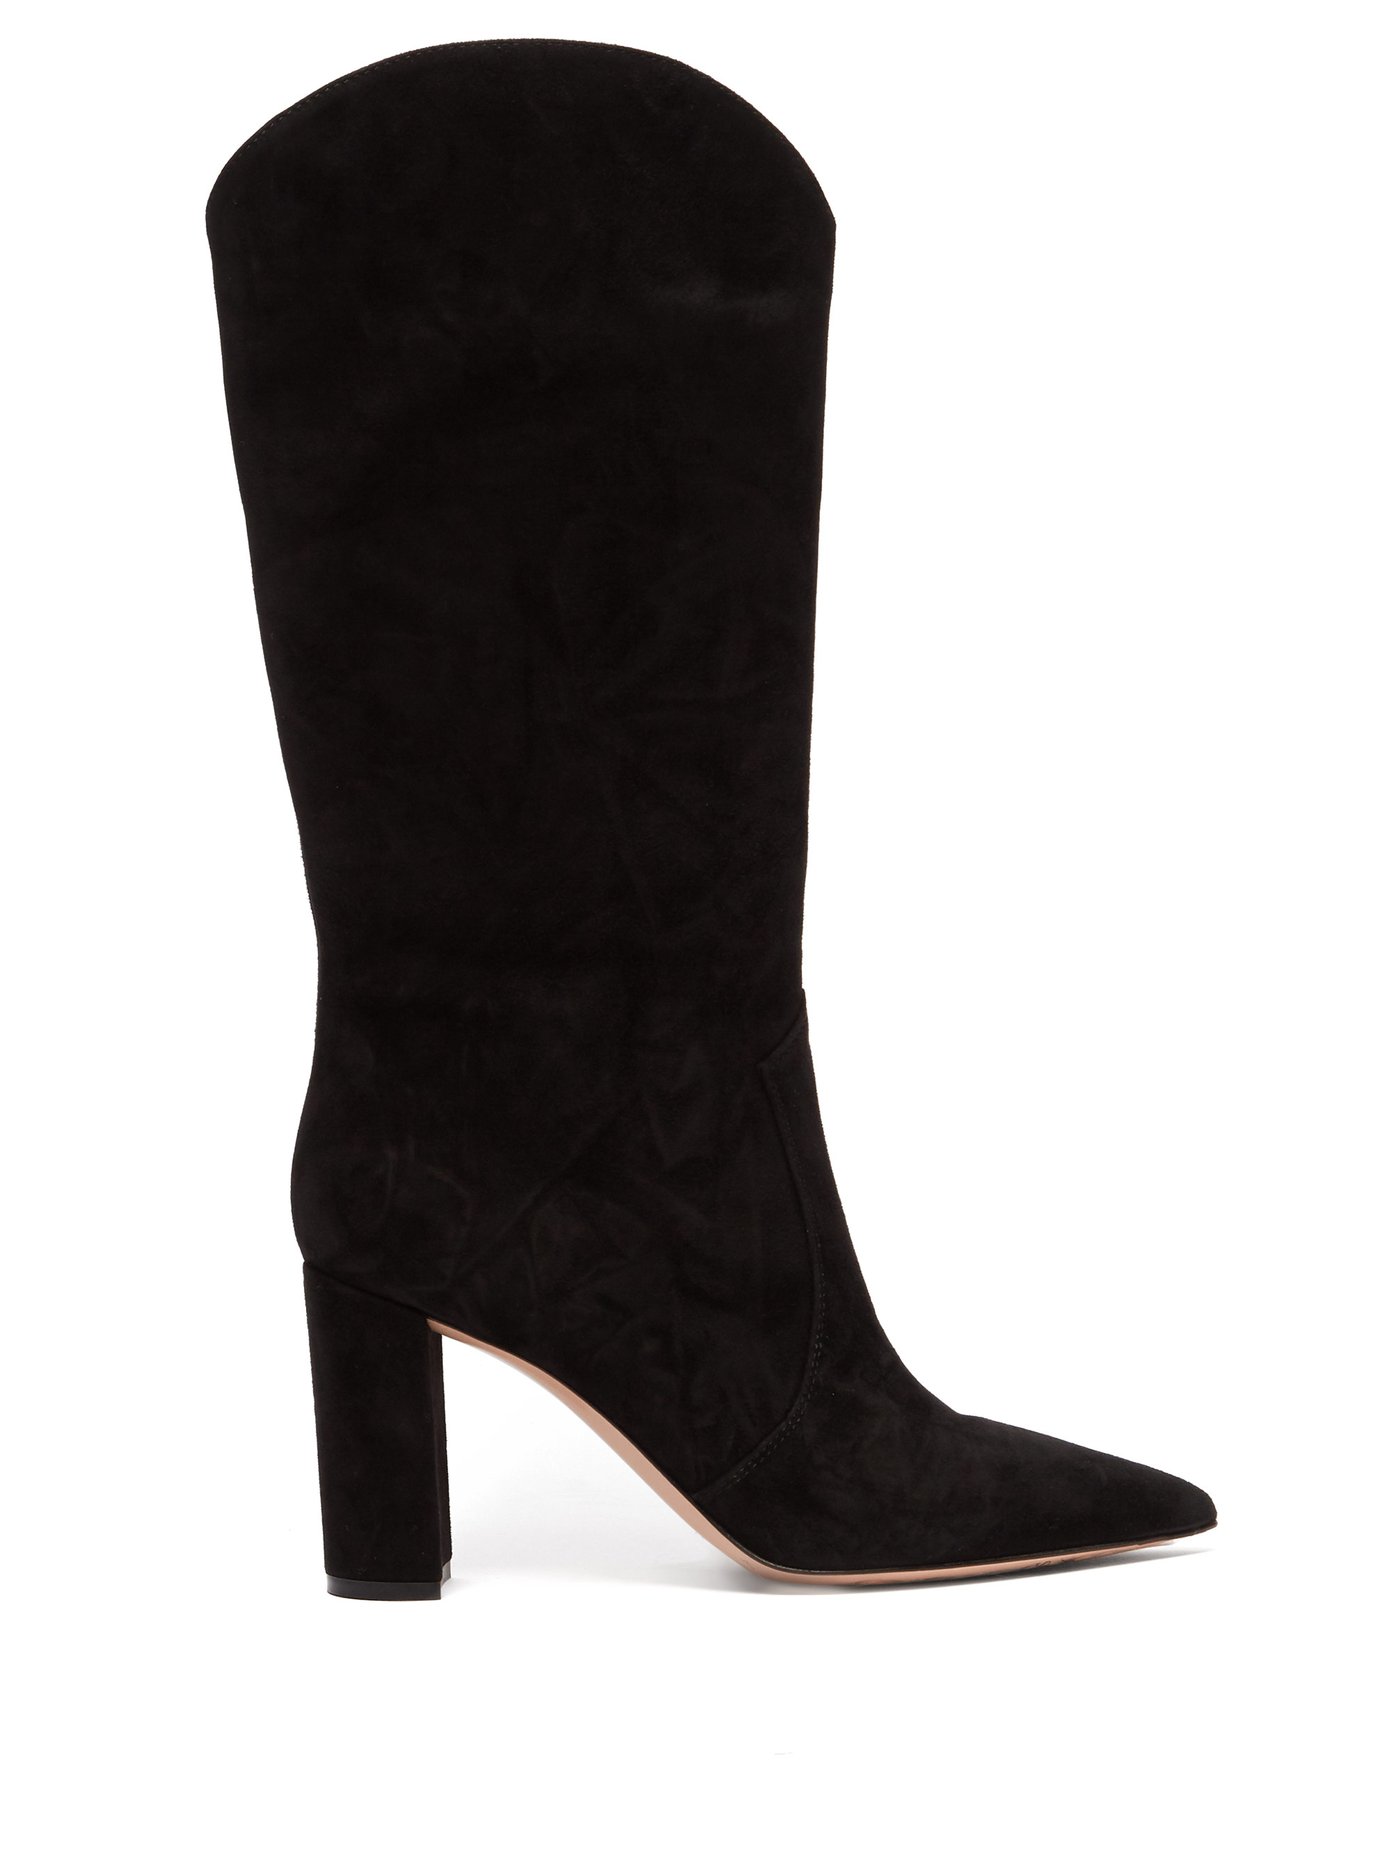 gianvito rossi knee high boots